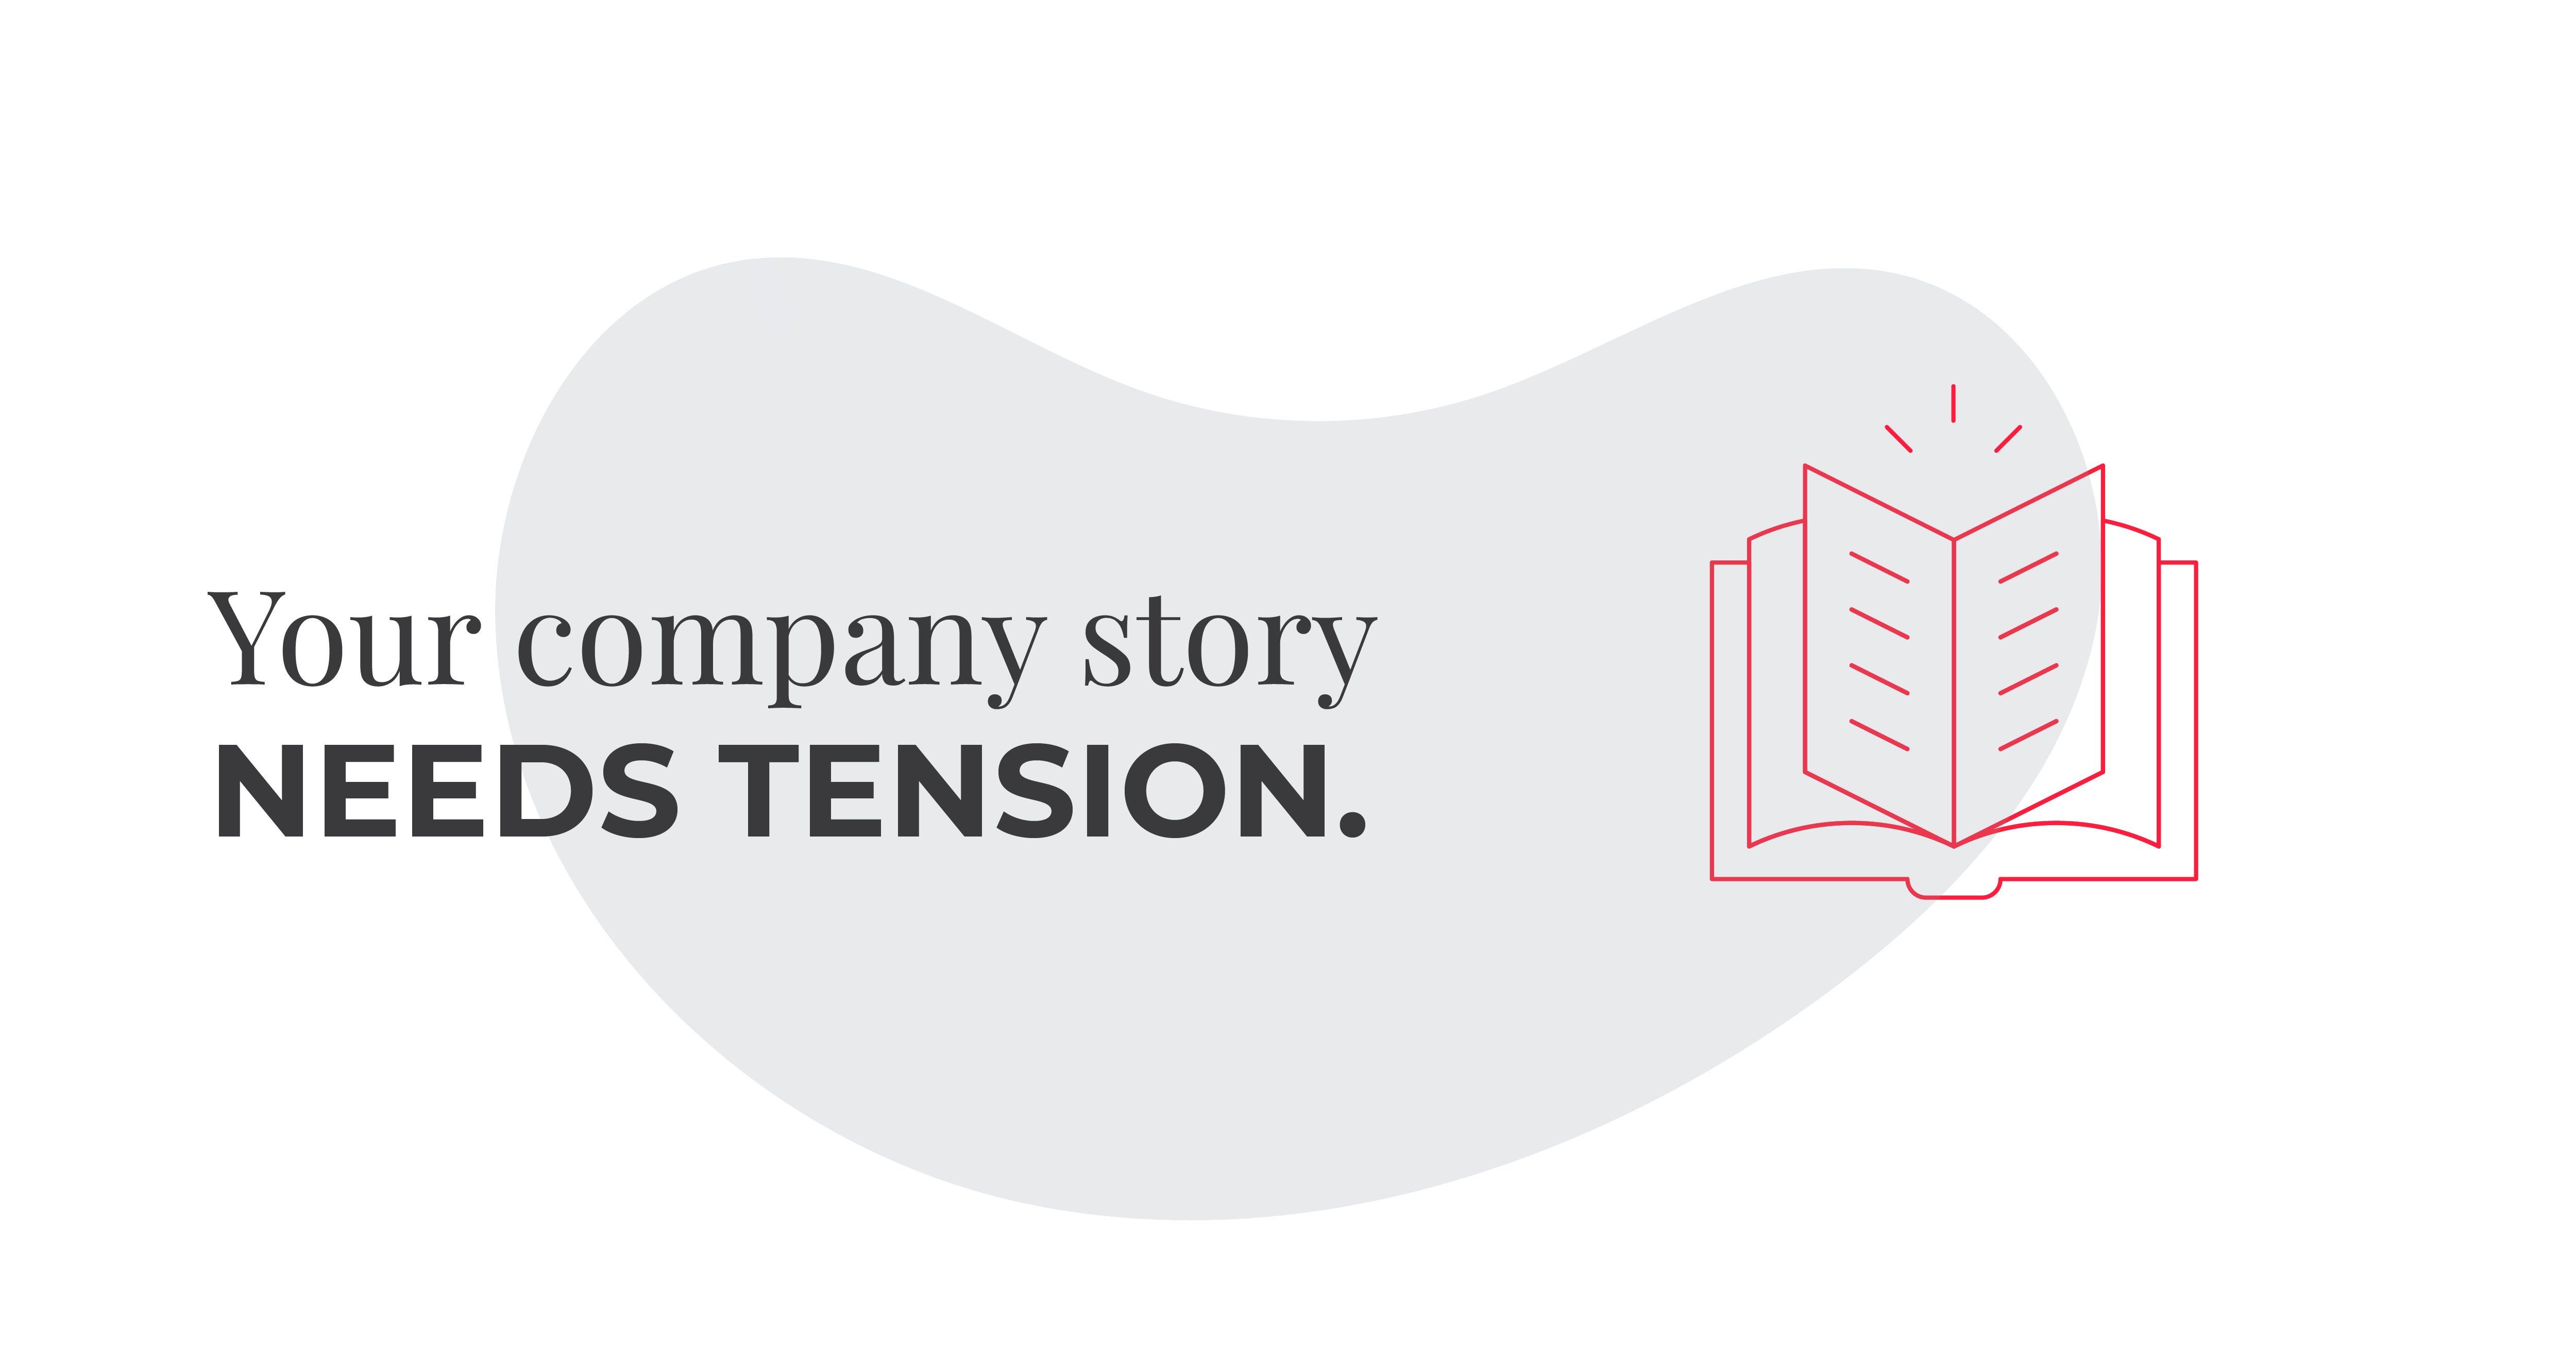 Your company story needs tension